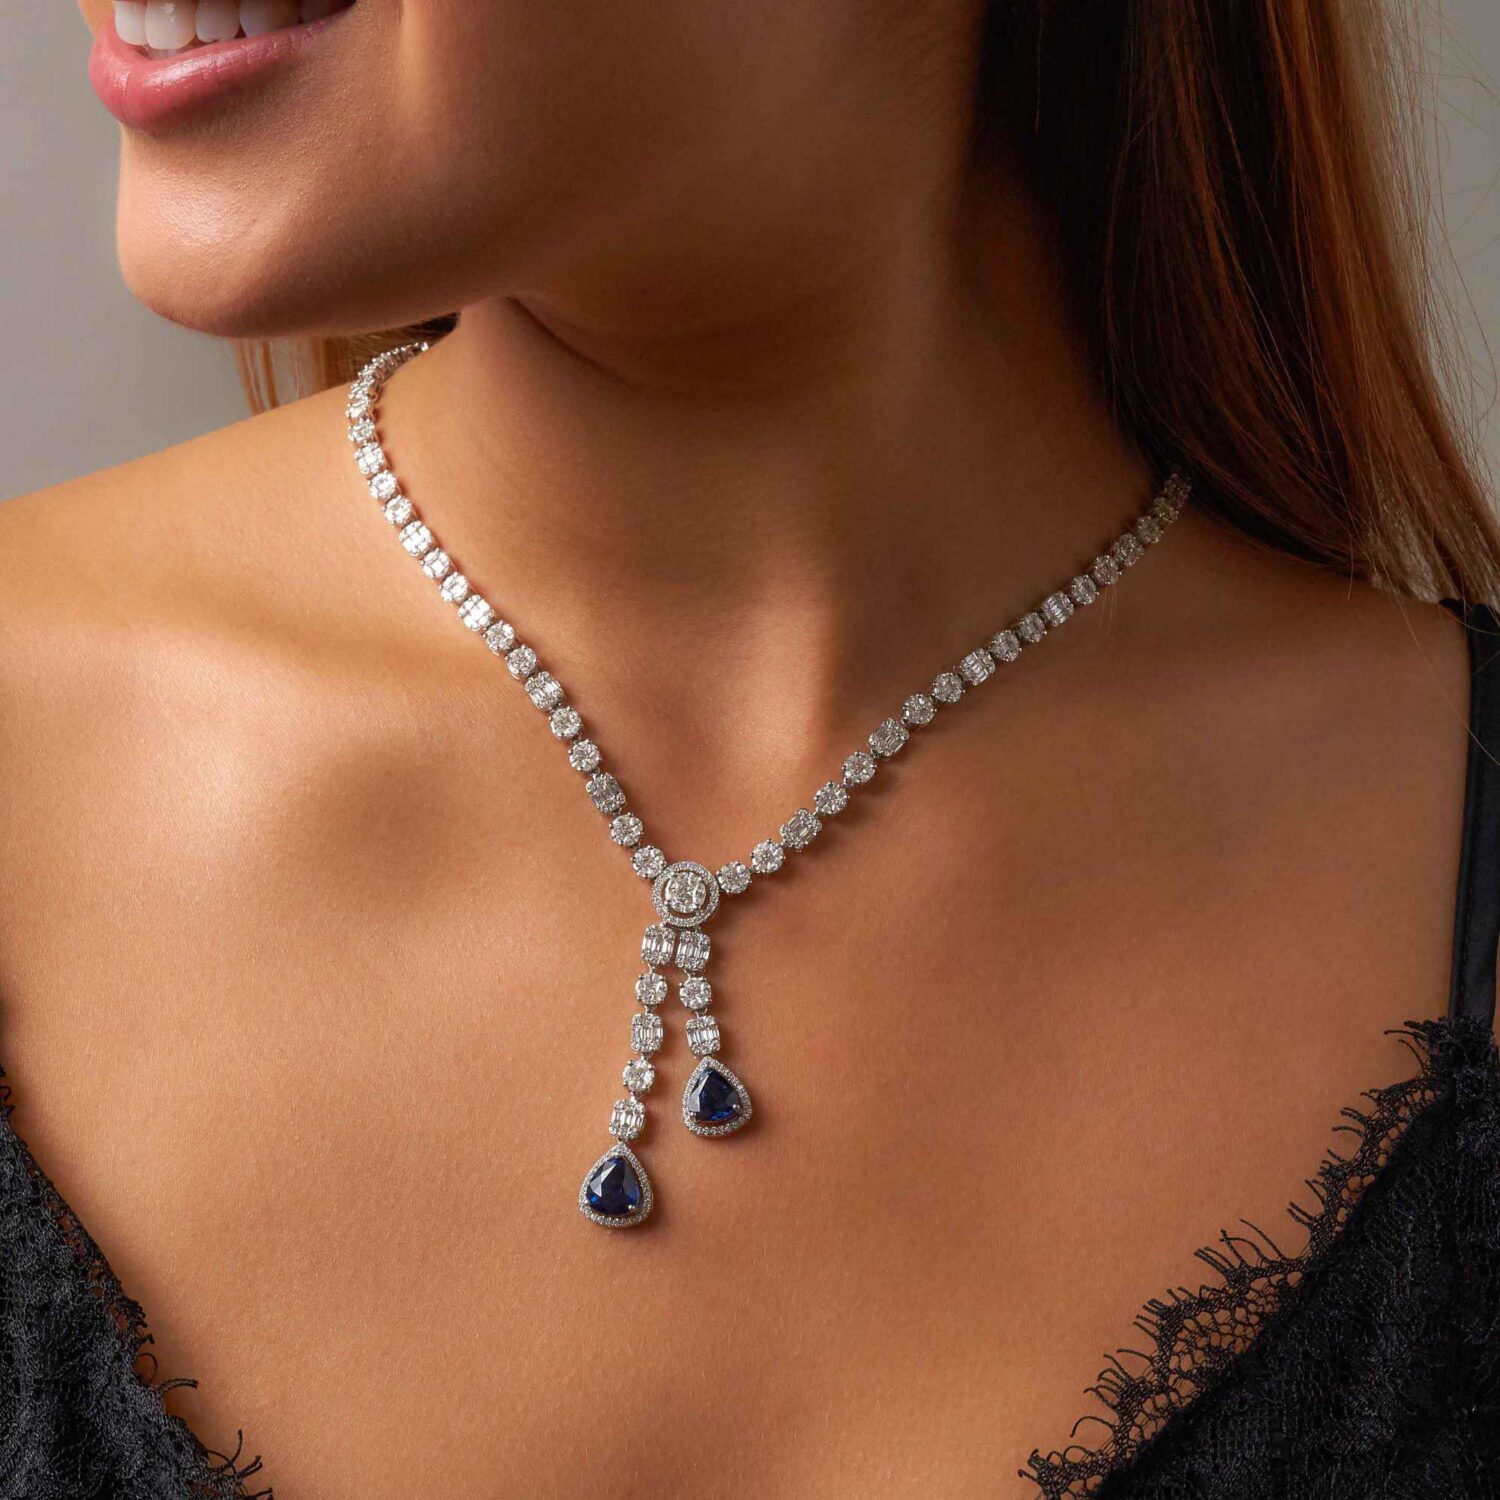 Sapphire Necklace - Richards Gems and Jewelry